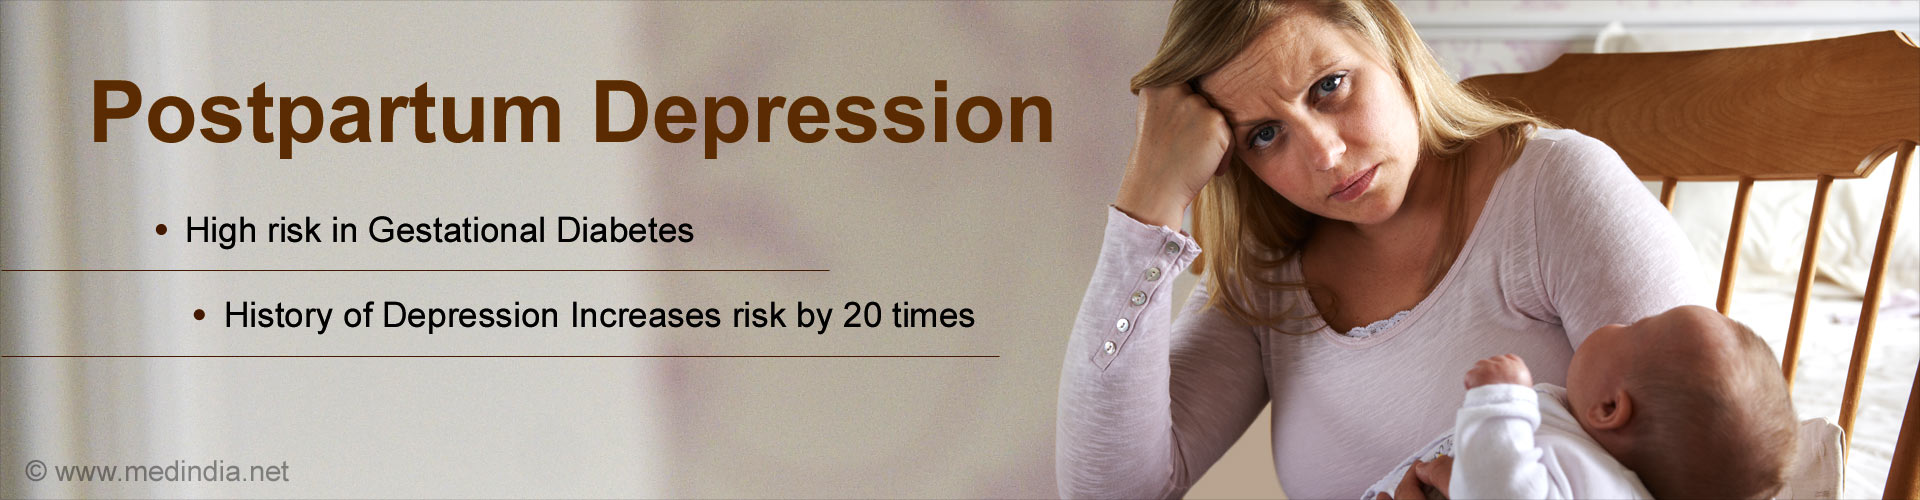 Postpartum Depression
- High risk in gestational diabetes
- Hisory of depession increase risk by 20 times